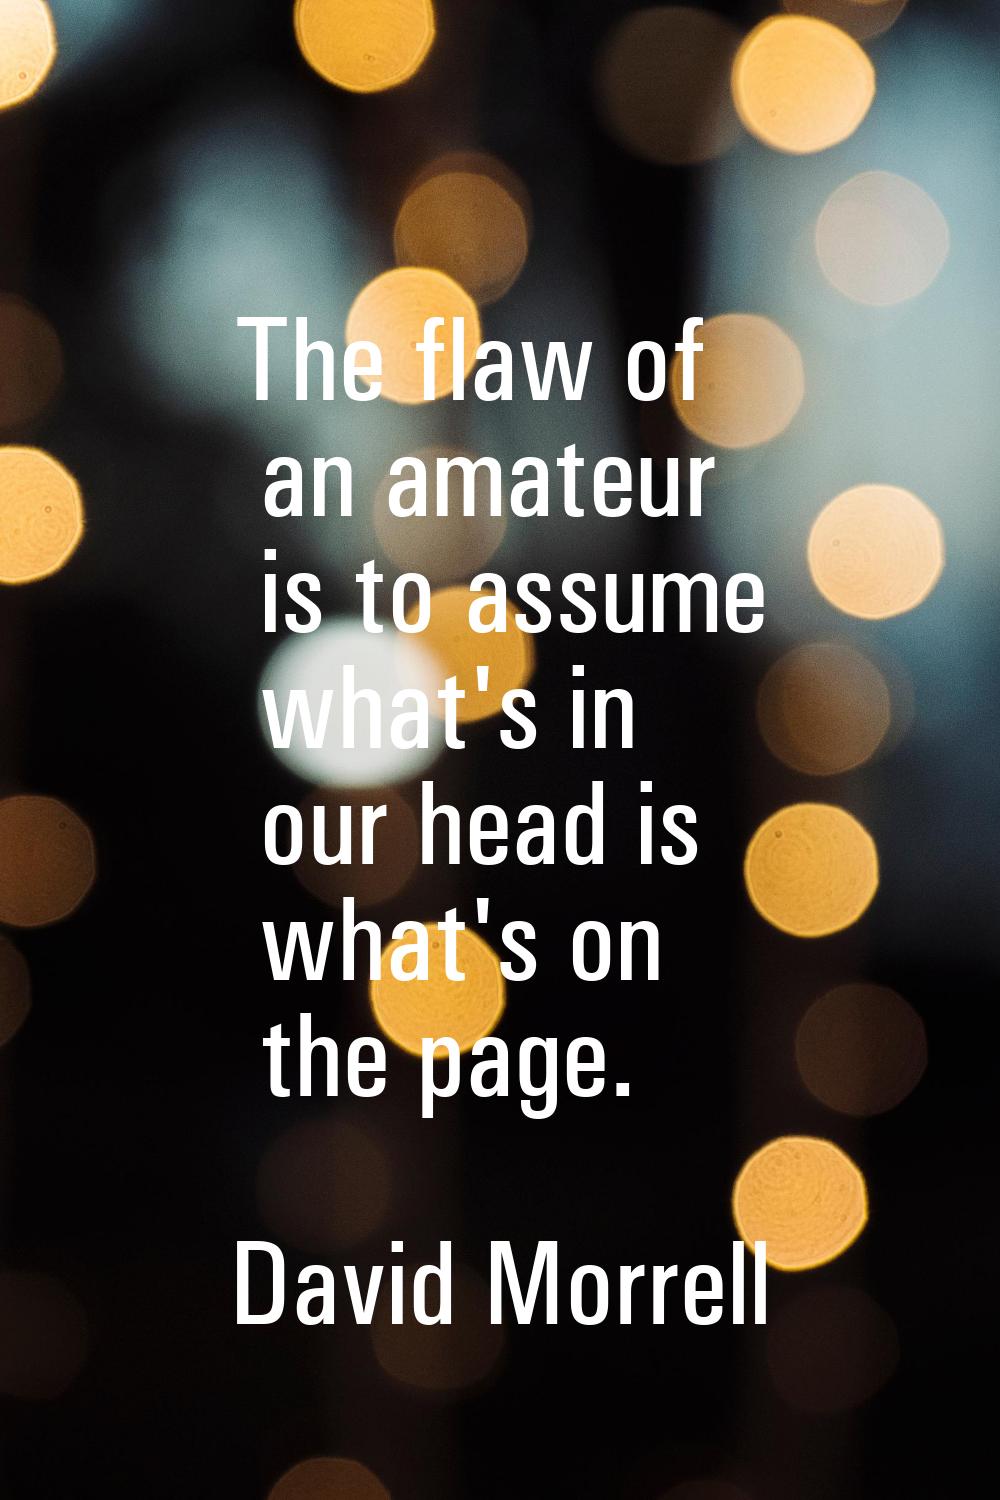 The flaw of an amateur is to assume what's in our head is what's on the page.